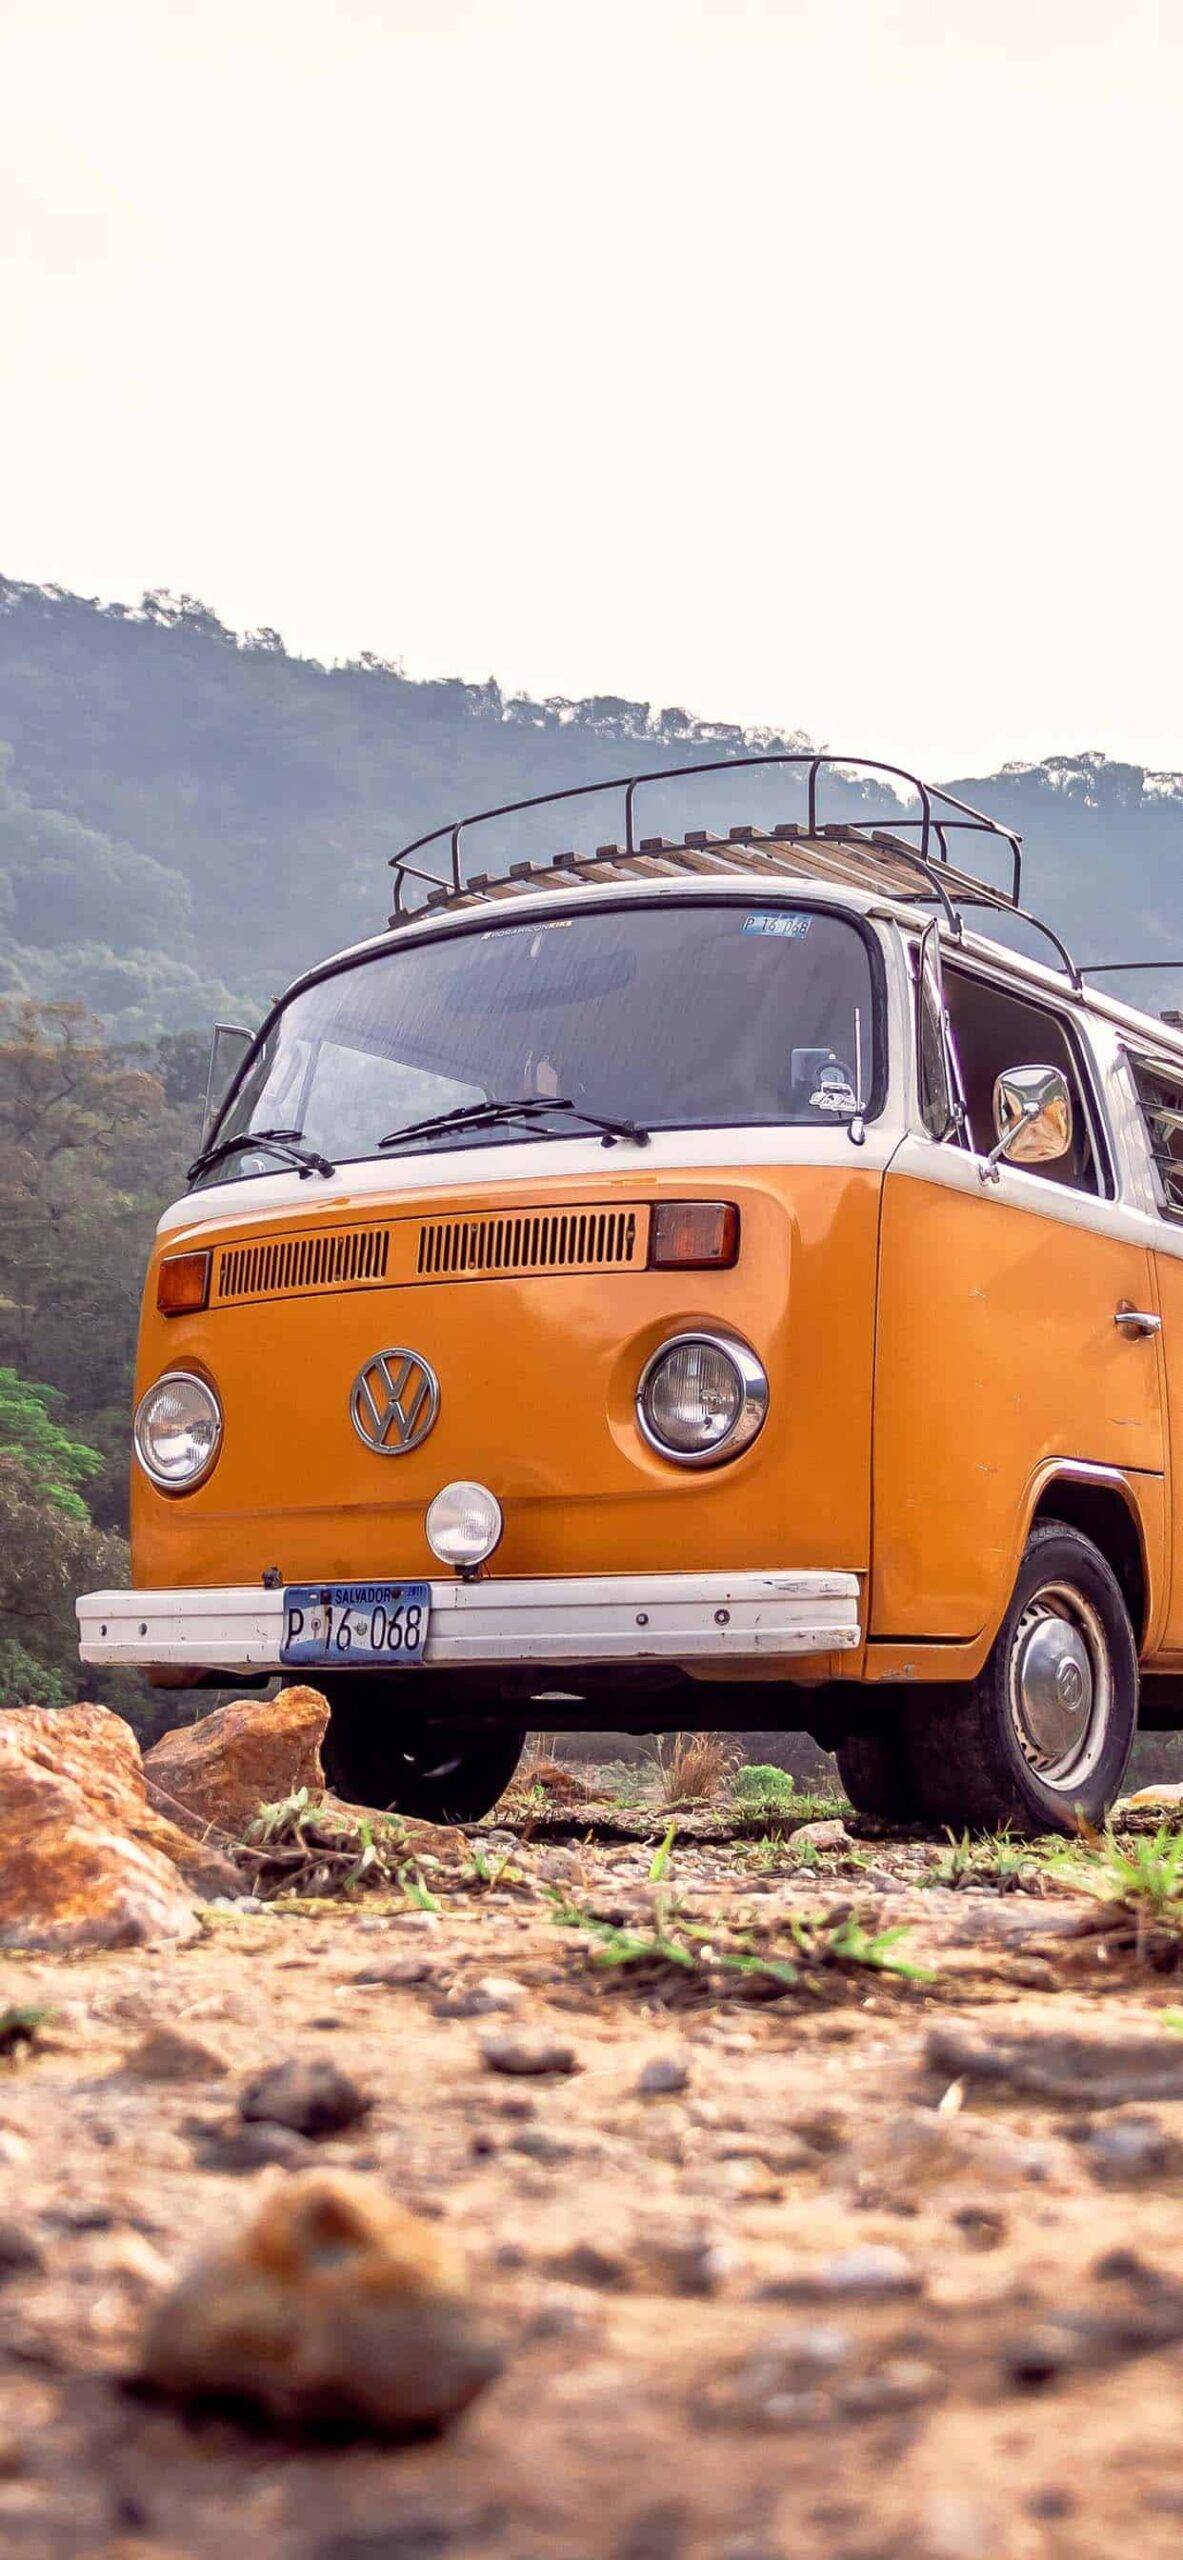 A yellow Volkswagen van is parked on a dirt road. - Vintage